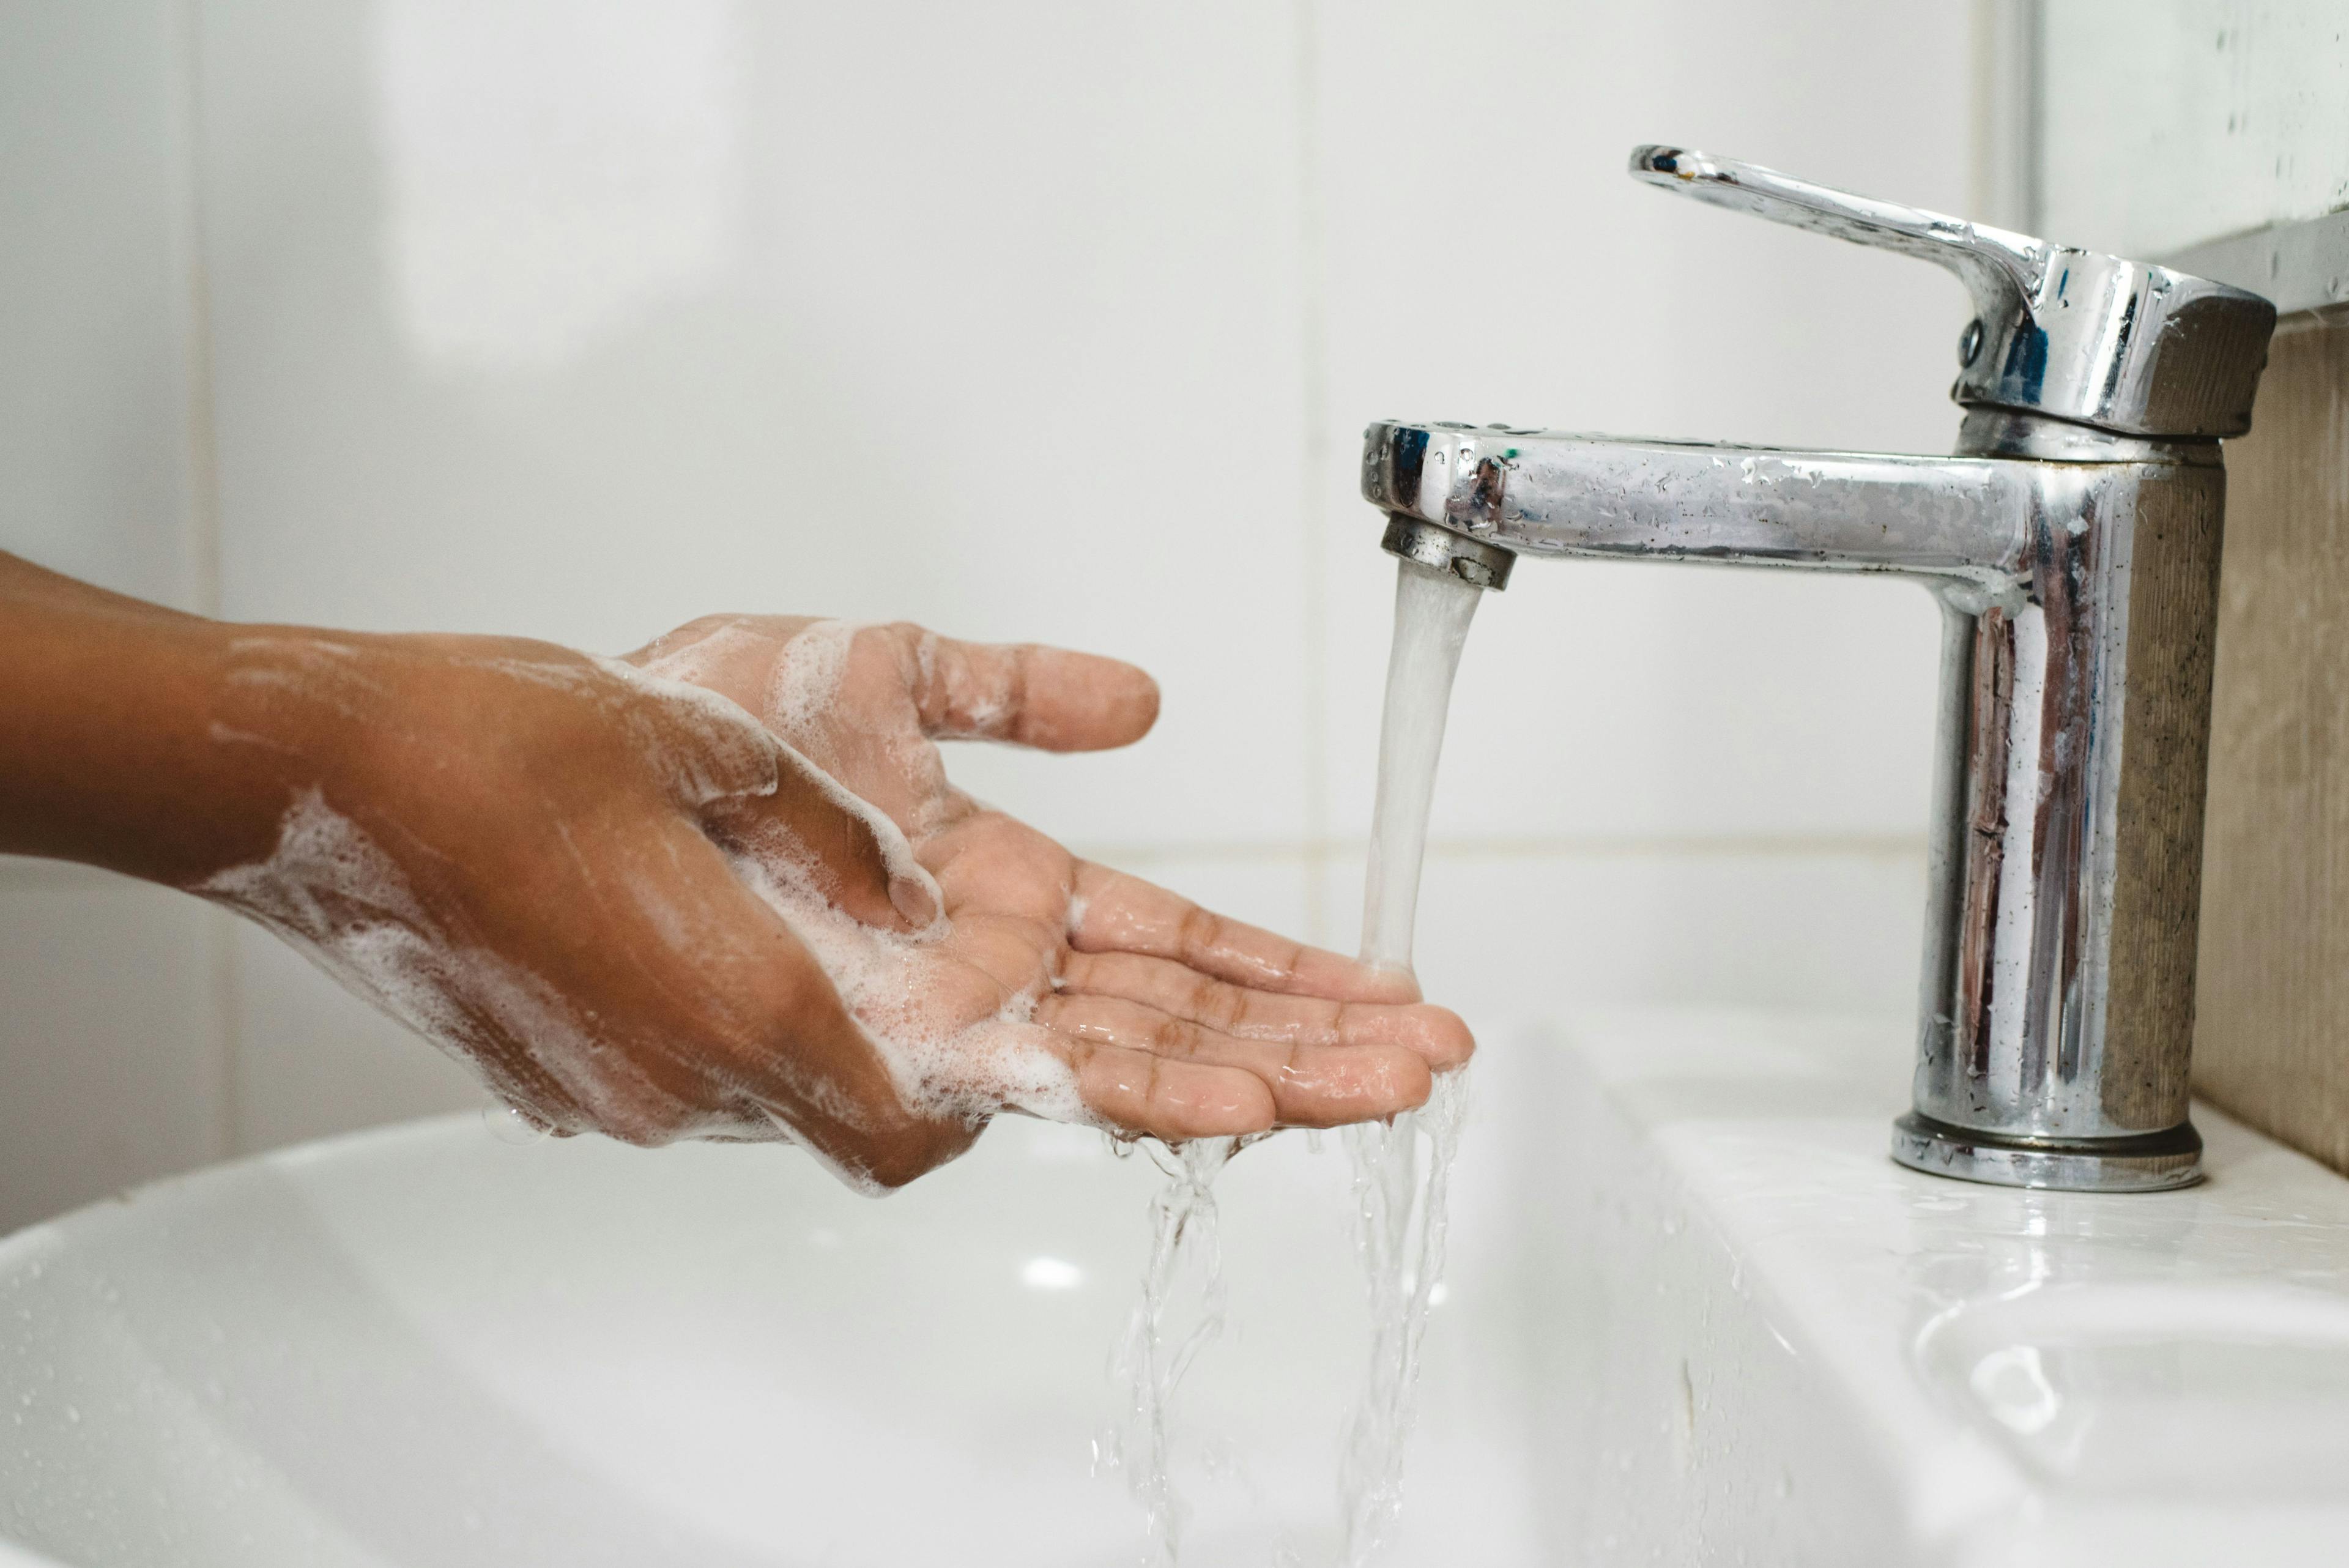 Skin Microbiome Diversity Lower With Soap and Water Compared With Hand Sanitizer Use